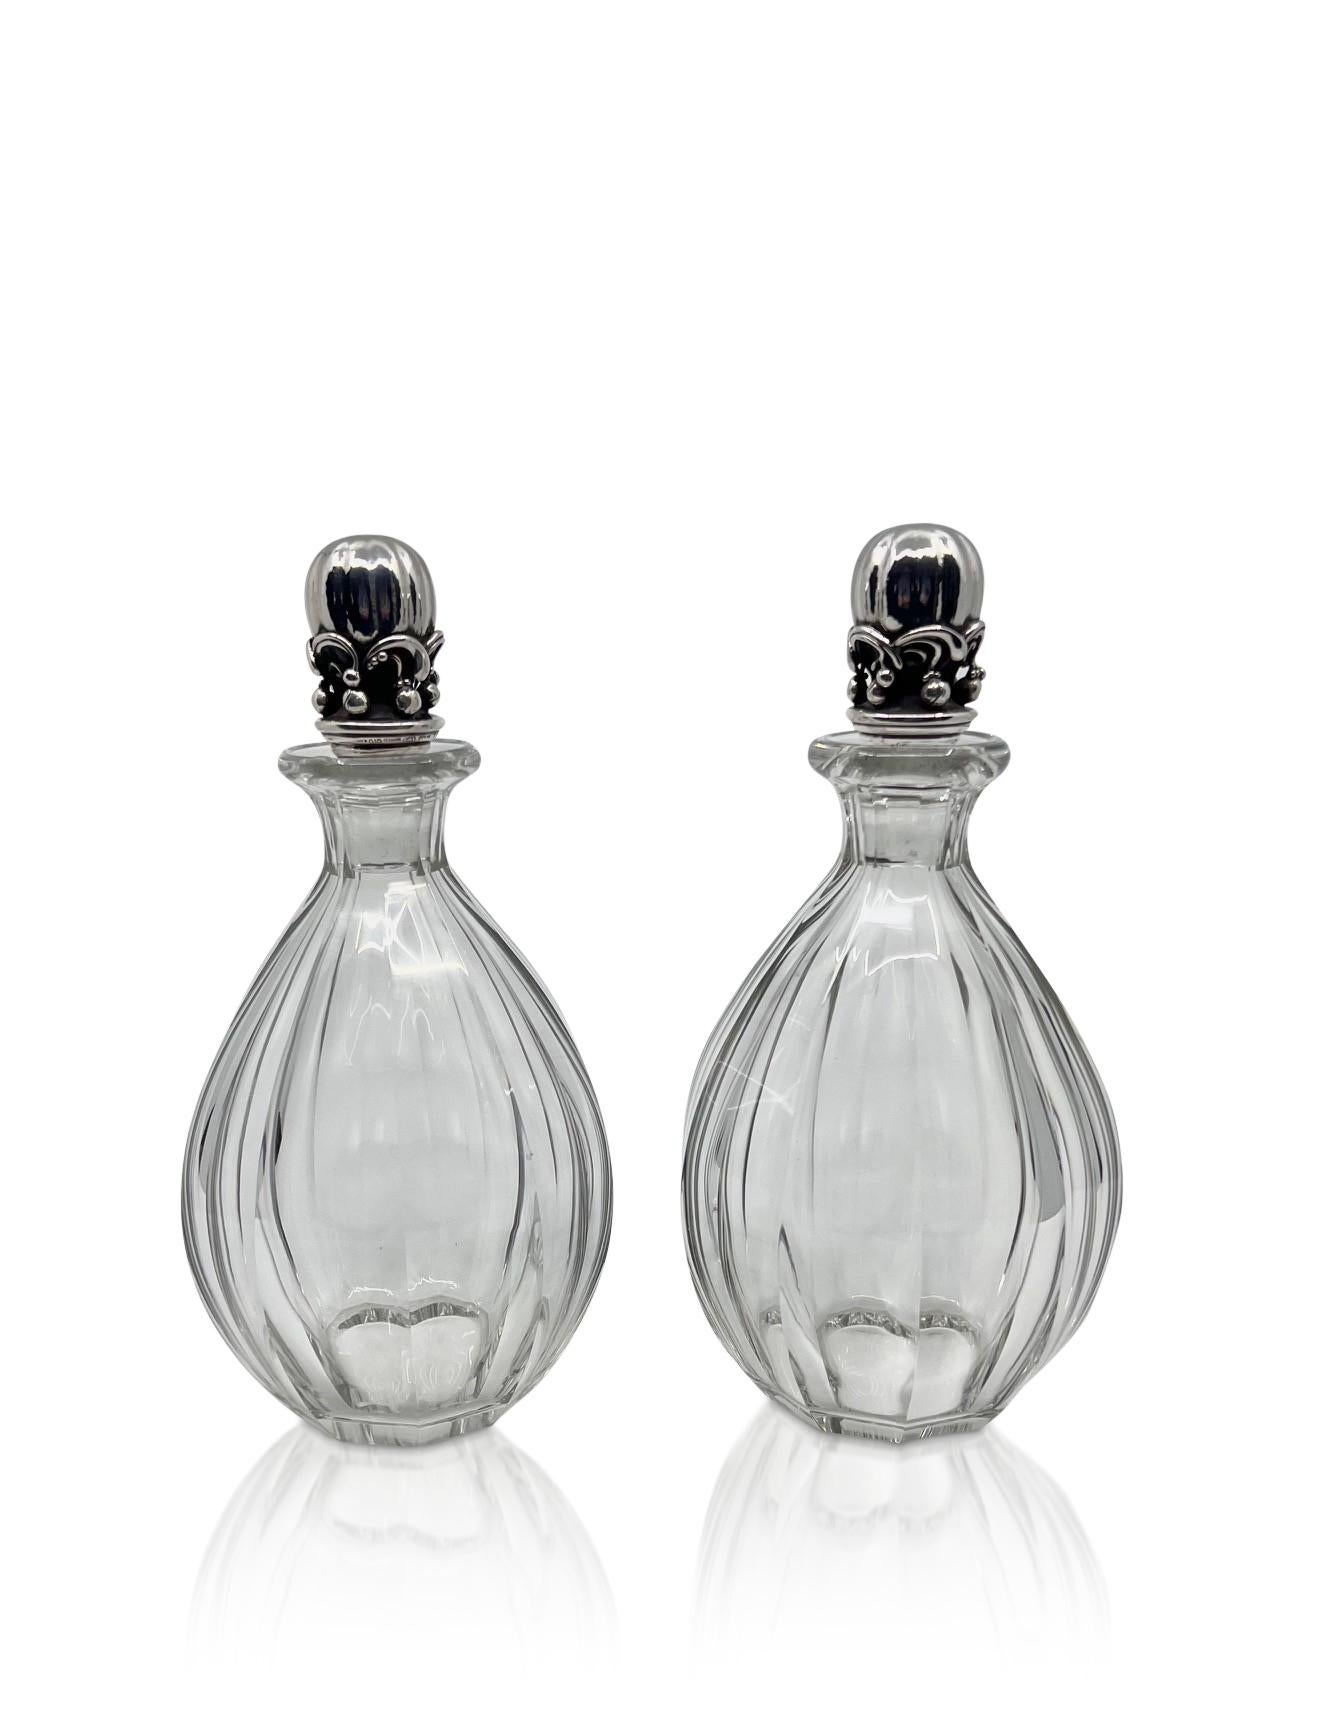 Hand-Crafted Georg Jensen Pair of Sterling Silver and Crystal Decanters #100 For Sale